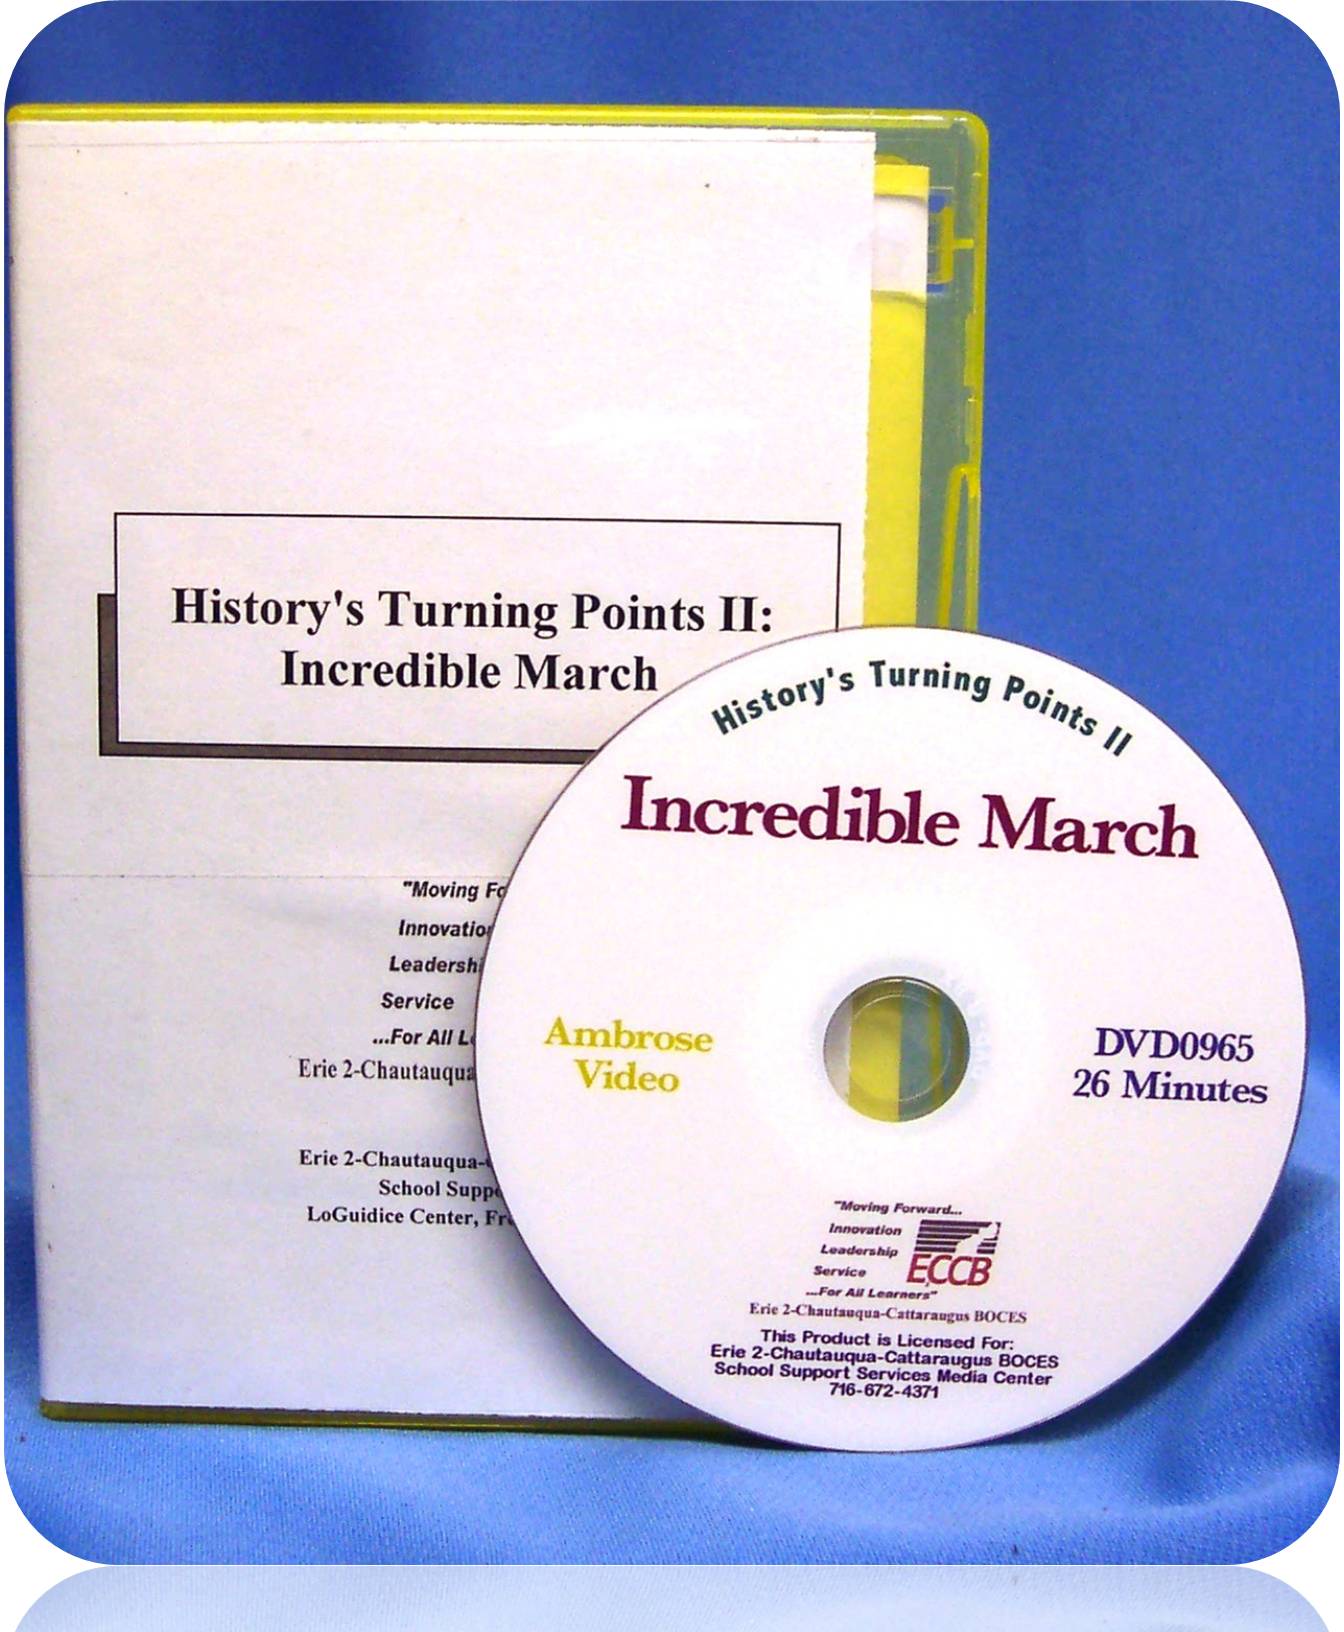 History's Turning Points II: Incredible March